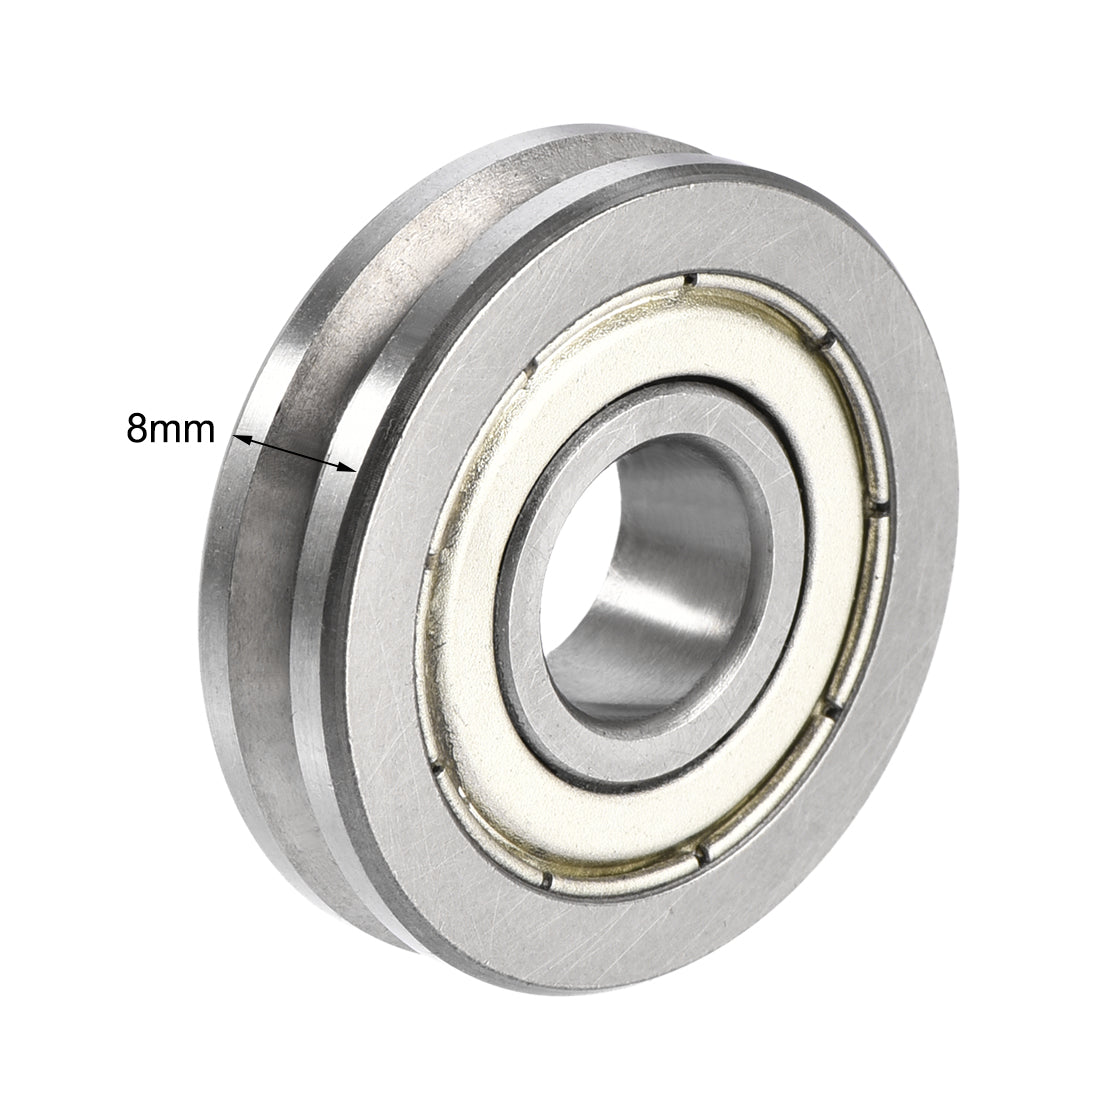 uxcell Uxcell V6000ZZ V-Groove Shaped Bearing 10mmx30mmx8mm Double Metal Shielded Bearing 2pcs